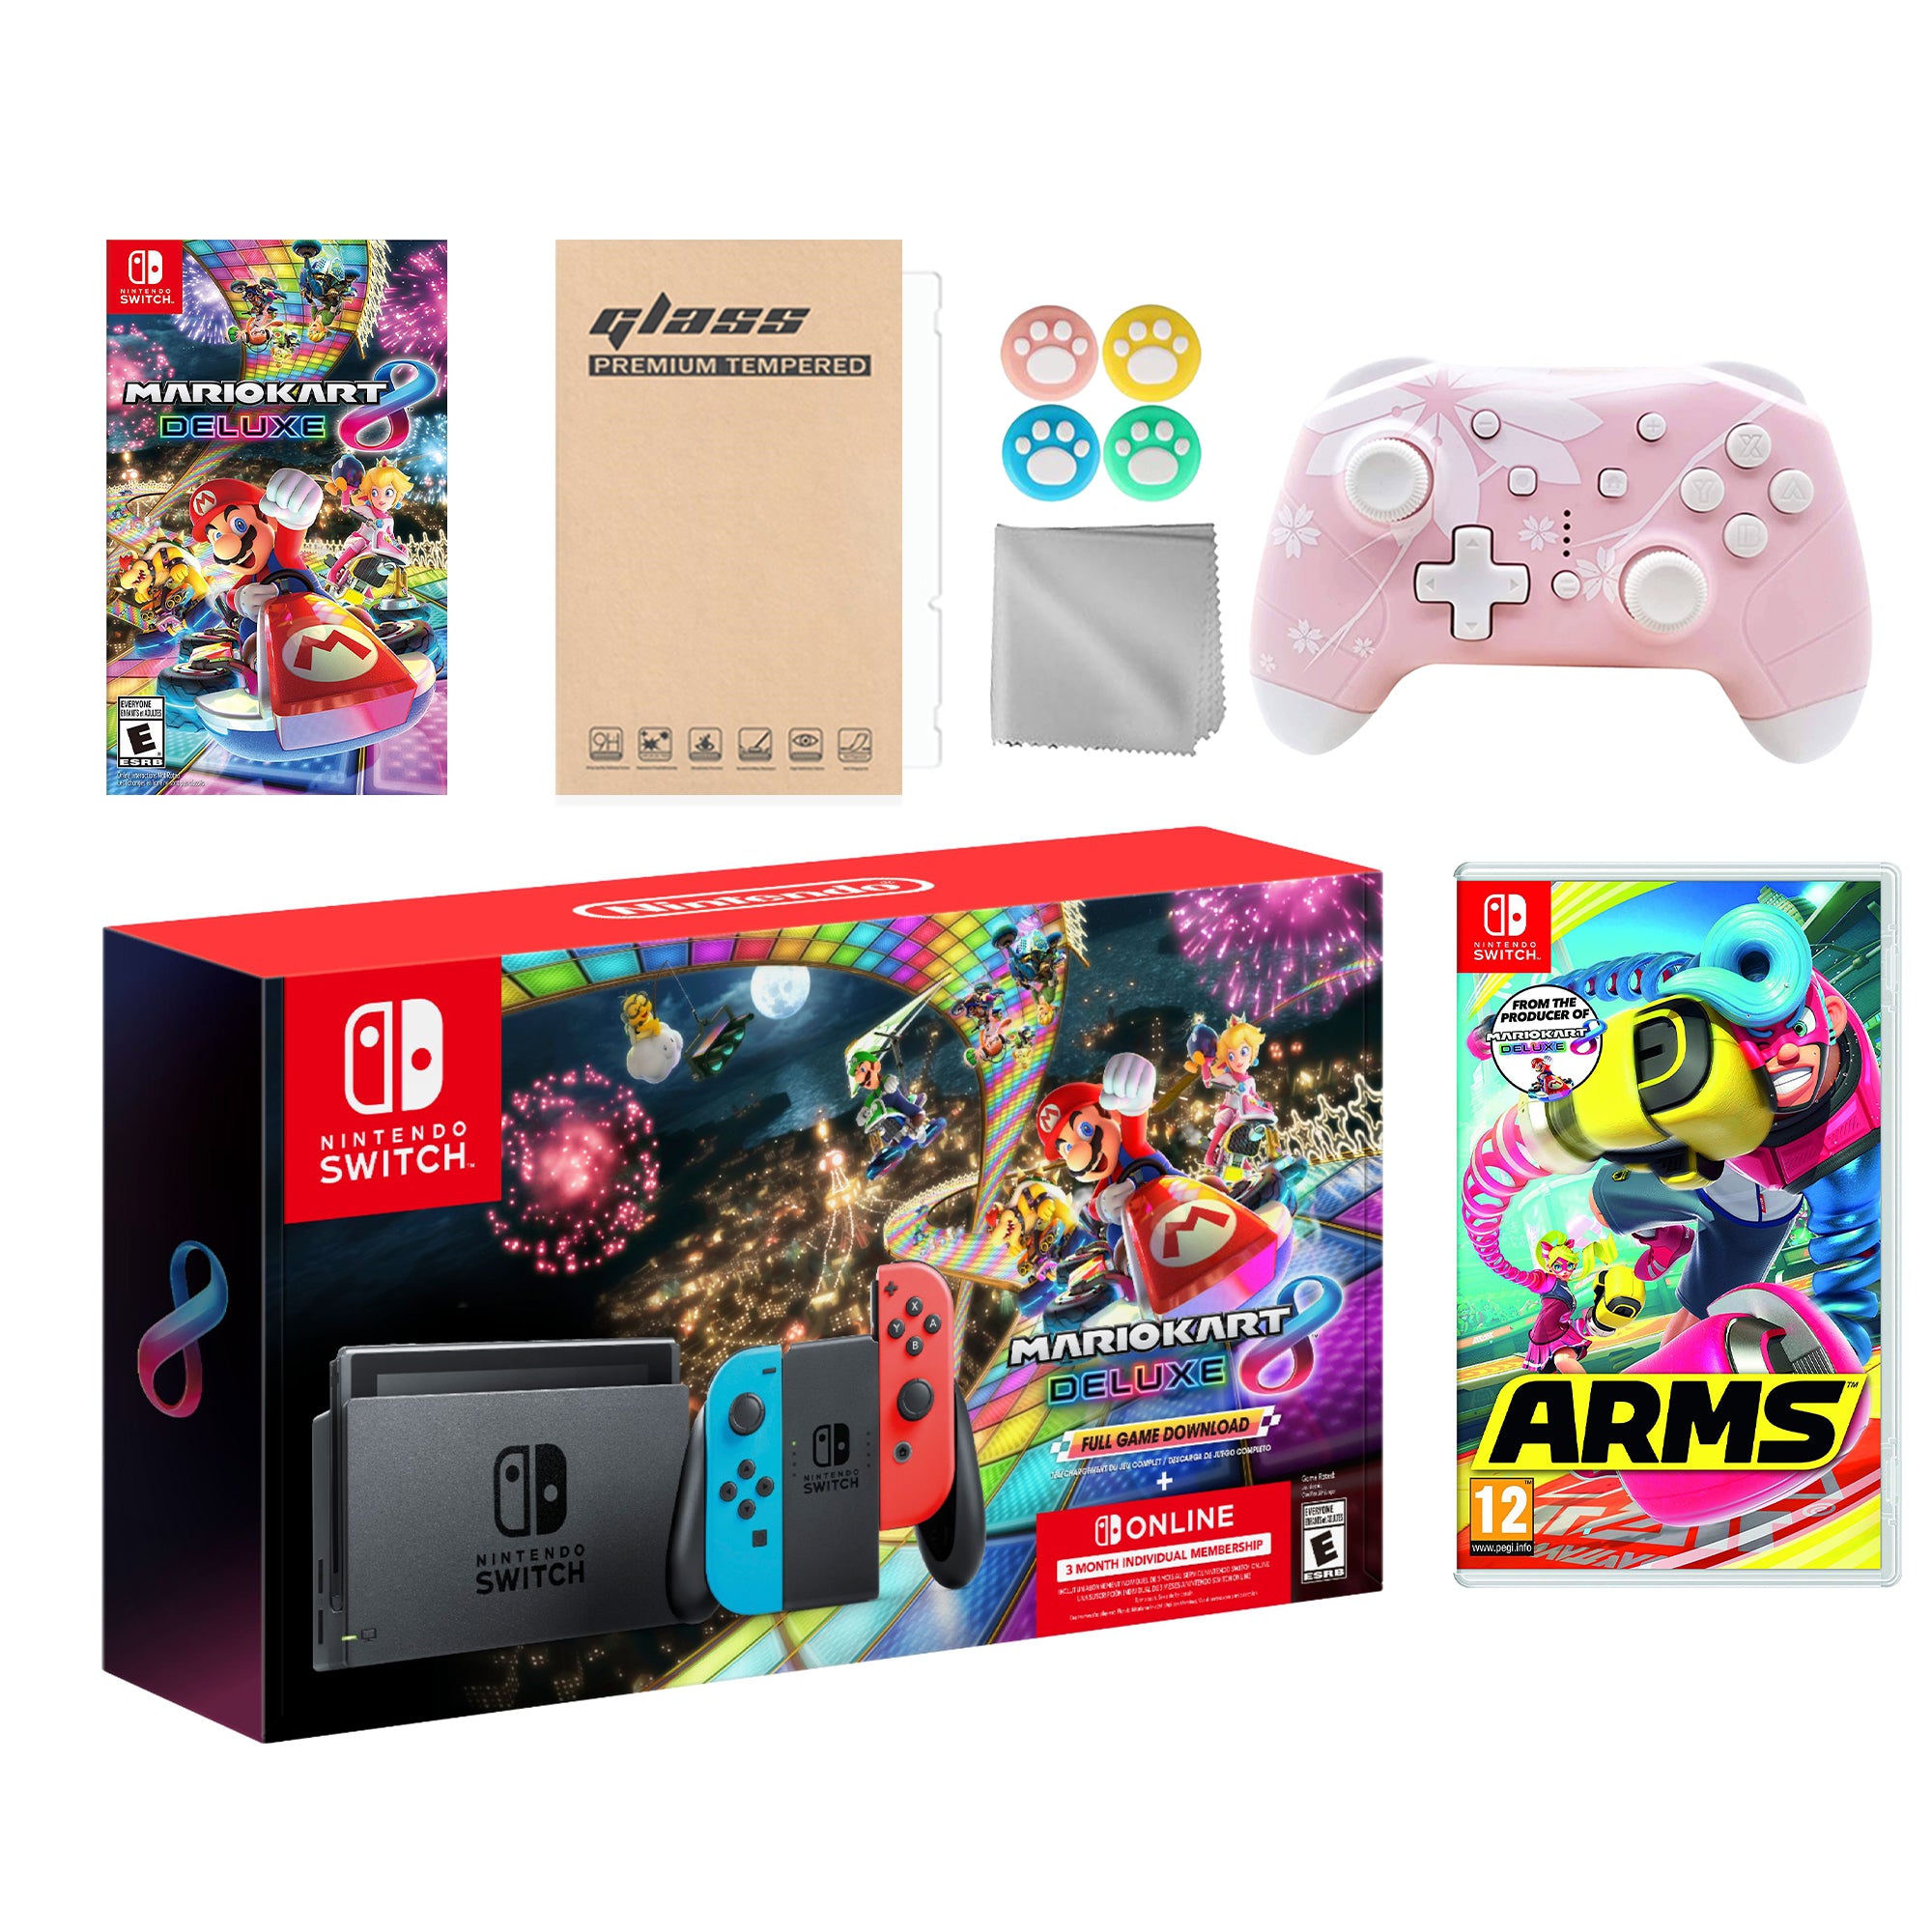 Nintendo Switch Mario Kart 8 Deluxe Bundle: Red Blue Console, Mario Kart 8 & Membership, Arms, Mytrix Wireless Pro Controller Pink Cherry Blossom and Accessories